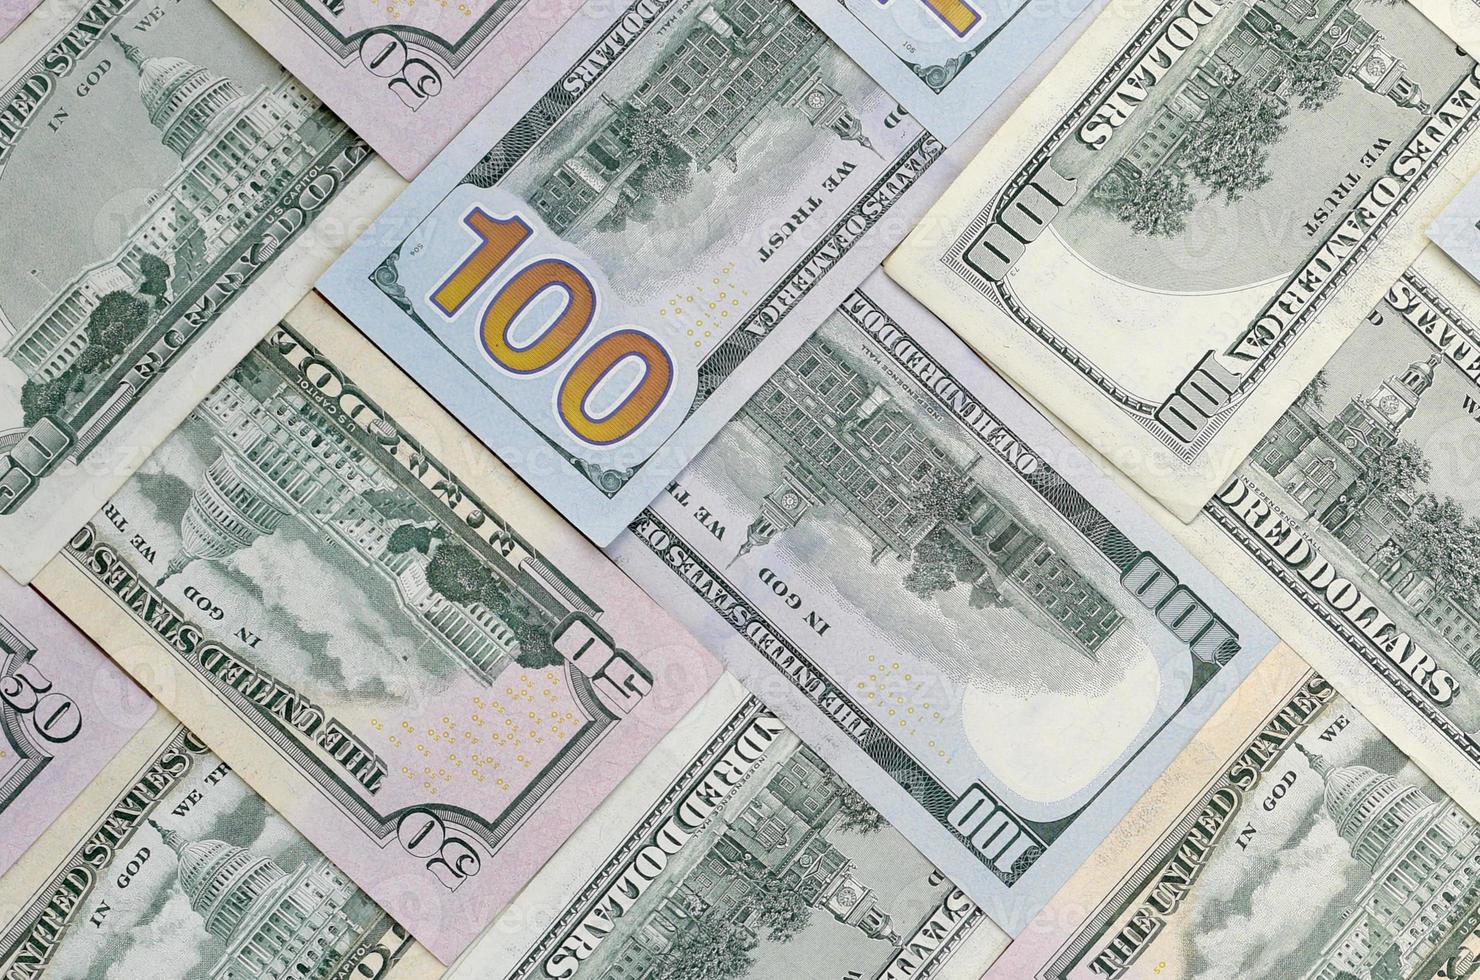 Many one hundred and fifty dollar bills on flat background surface close up. Flat lay top view photo